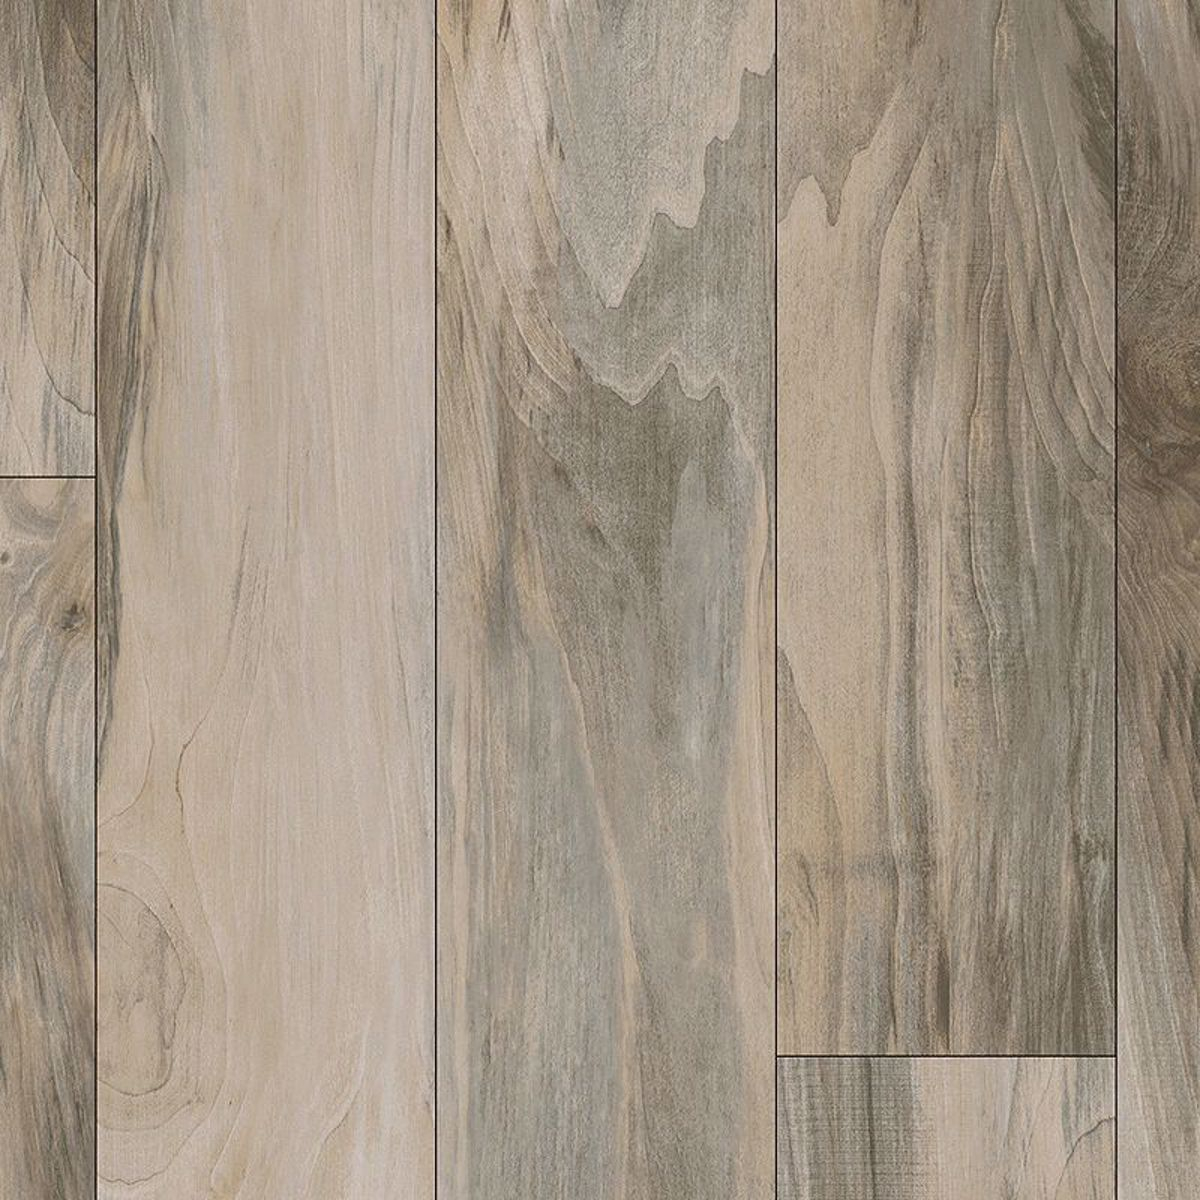 vinyl plank Street Chic 979 Founders Trace Fts21 Mohawk Vinyl Plank Vinyl Plank Flooring